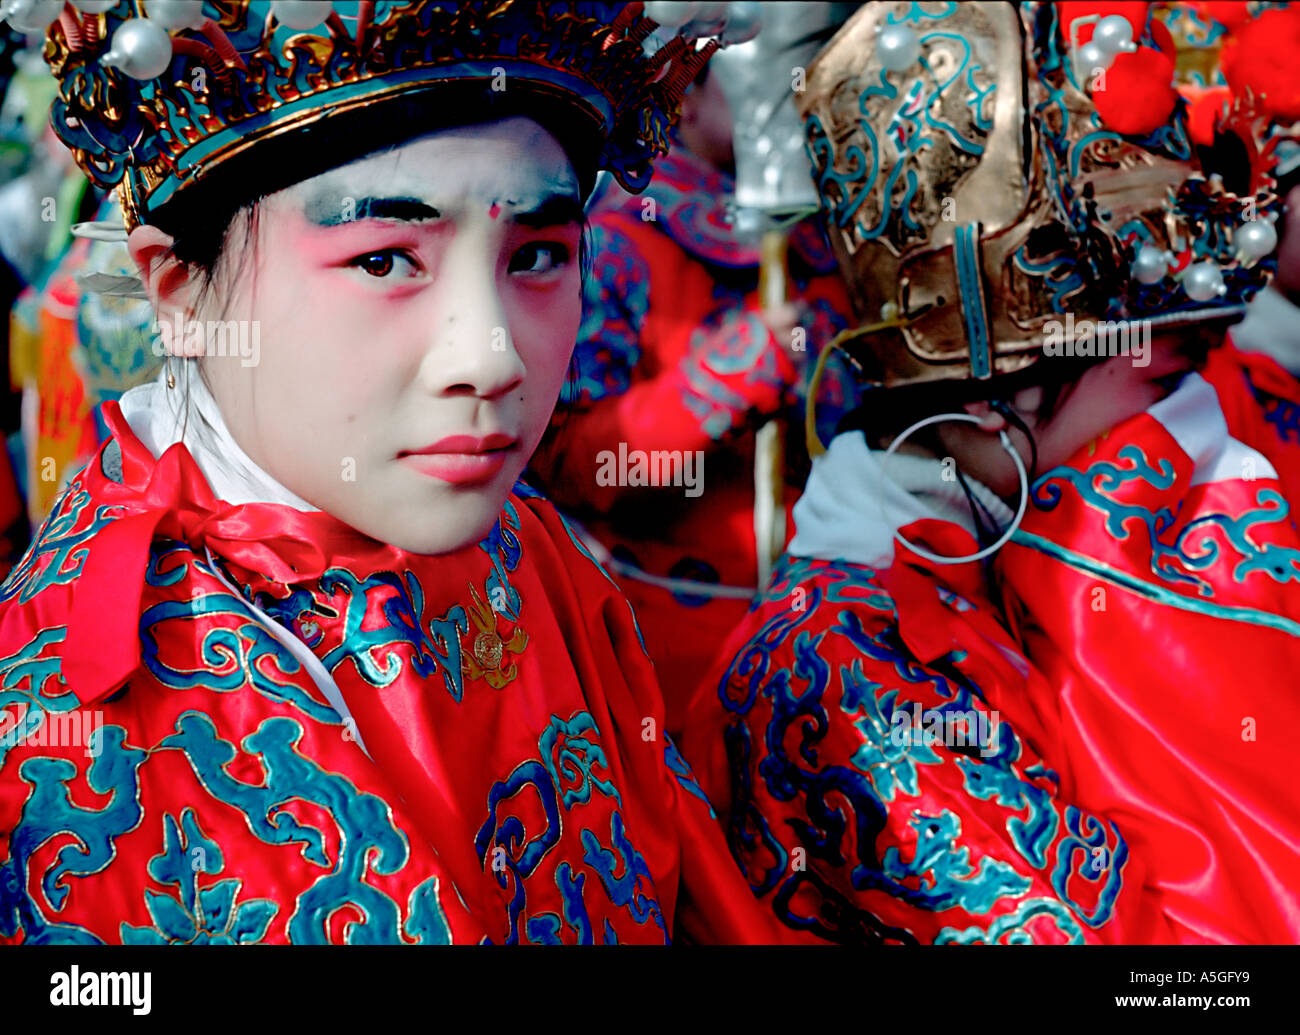 Members of the Chinese community in Paris gather in full regalia for the celebration of the Chinese New Year Stock Photo